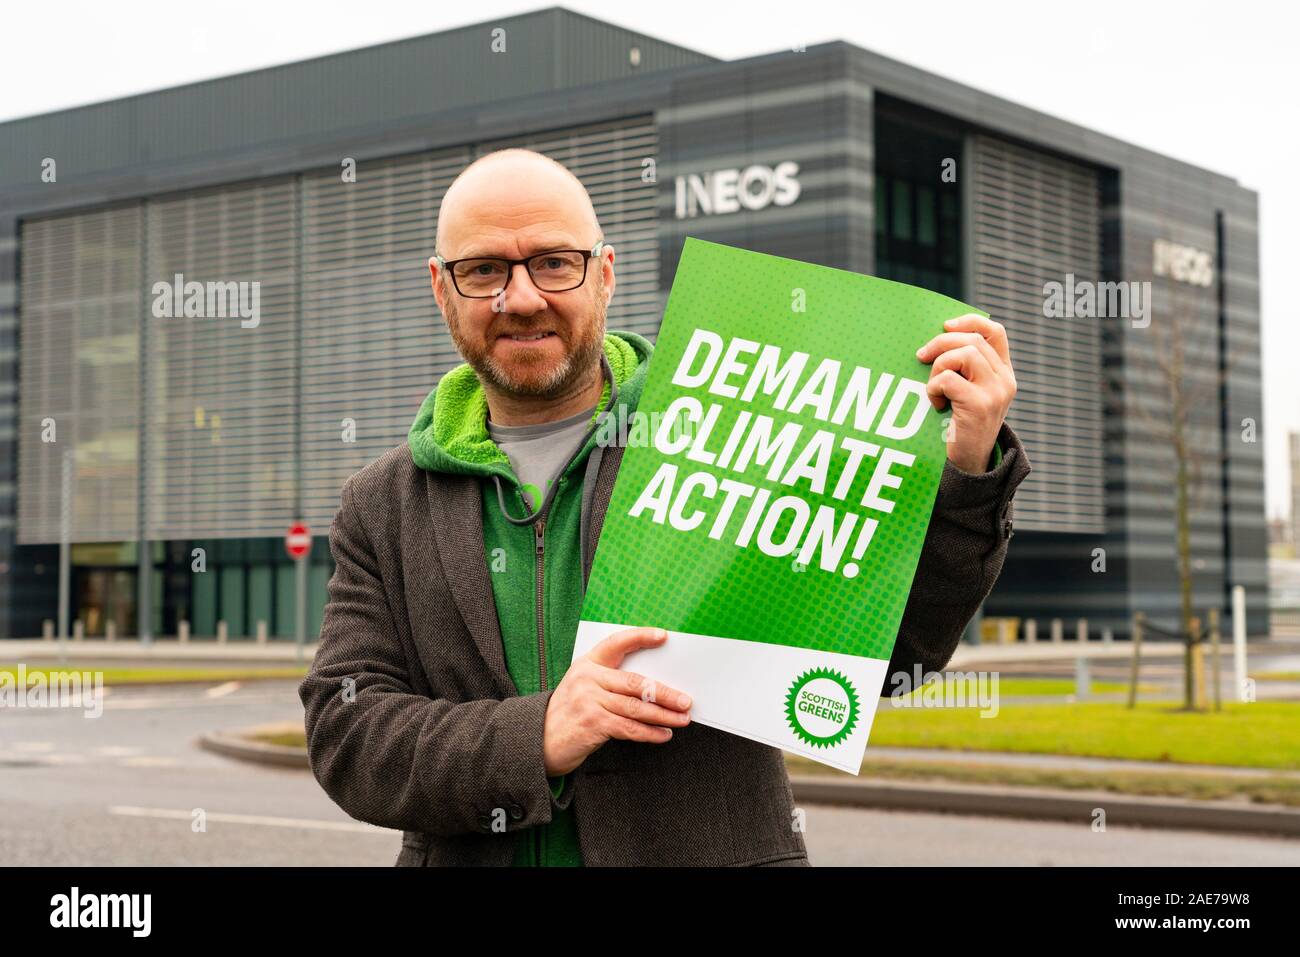 Grangemouth, Scotland, UK. 7th December 2019. Scottish Greens co-leader Patrick Harvie joined Linlithgow and East Falkirk candidate Gillian Mackay for a demonstration outside INEOS offices in Grangemouth. The refinery operated there by INEOS is ScotlandÕs biggest polluter according to the Greens. The Scottish Greens are calling for the end of shale gas imports, which bring fracked gas from the US to Grangemouth. Pictured; Patrick Harvie. Iain Masterton/Alamy Live News Stock Photo